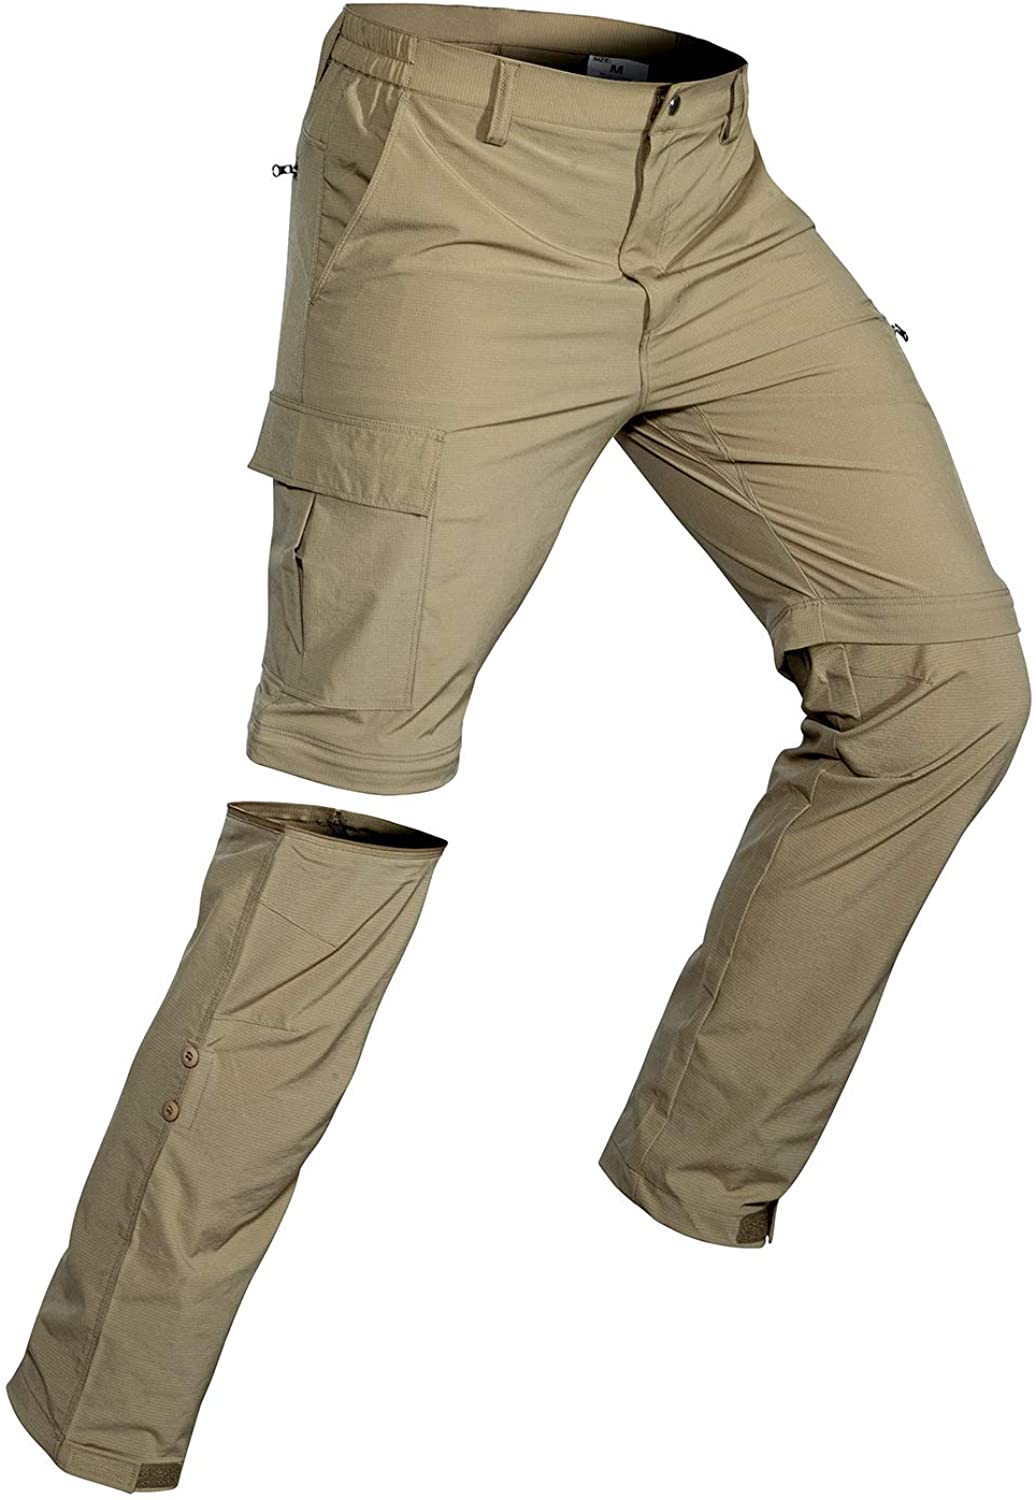 Men's Breathable Cargo Convertible Hiking Pants - Wespornow Brown / 3X-Large